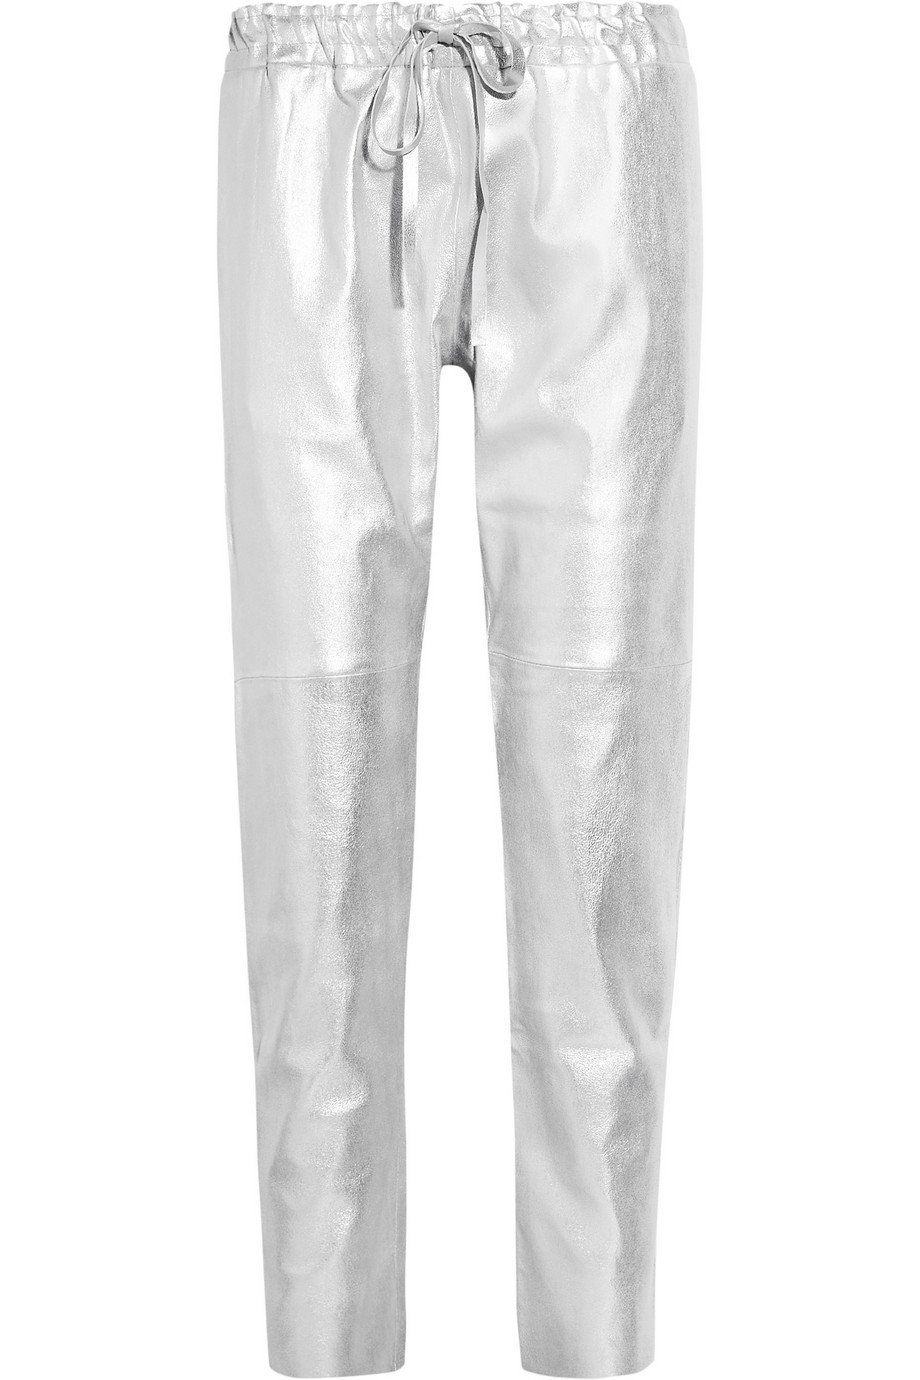 Les Chiffoniers Metallic Drawstring Leather Pants in Silver | Lyst